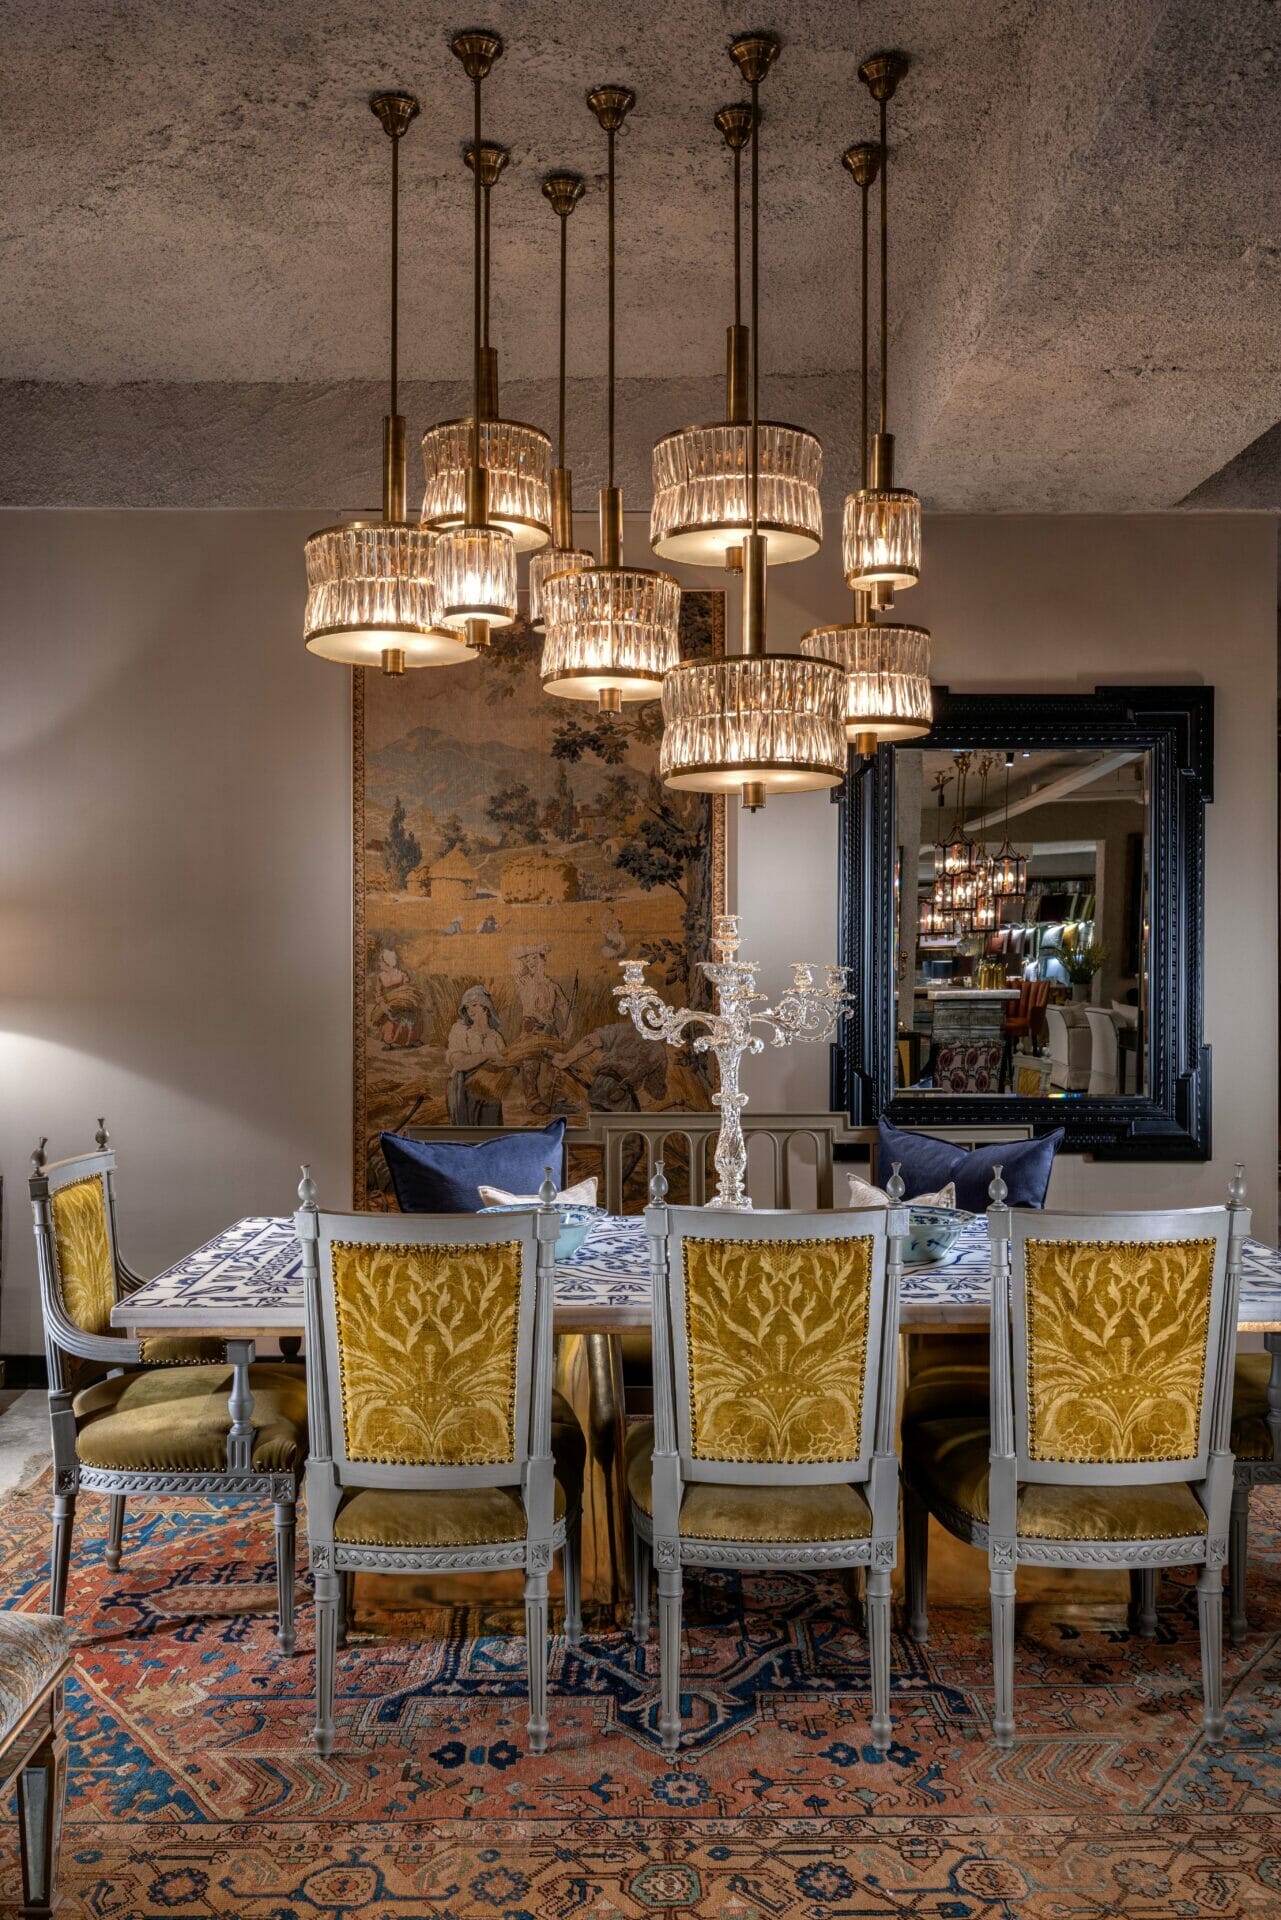 Beyond Designs introduces an intimate yet artistic Dining space